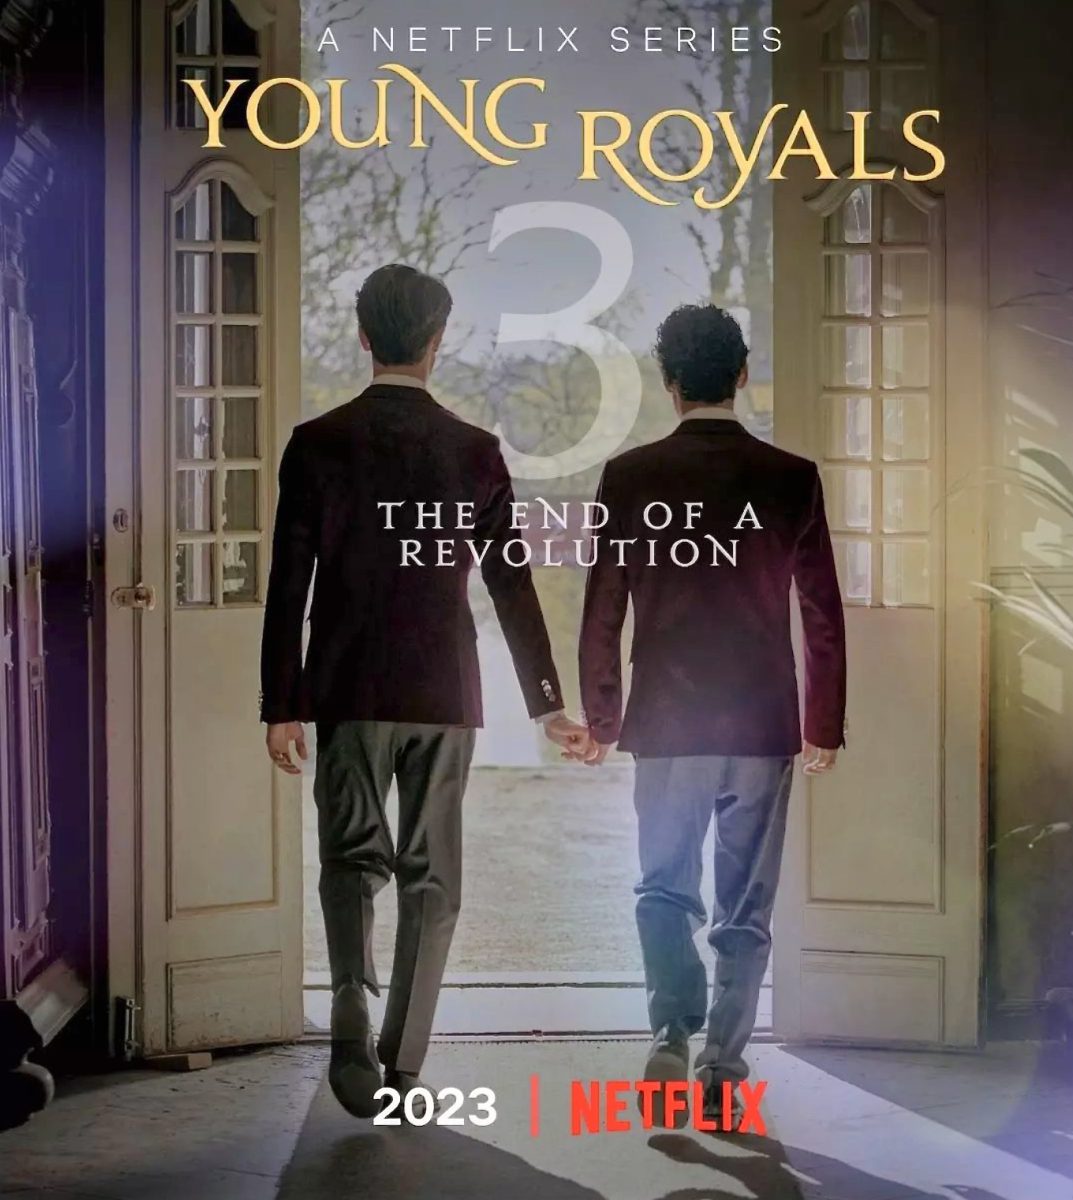 A+Royally+Awesome+Series